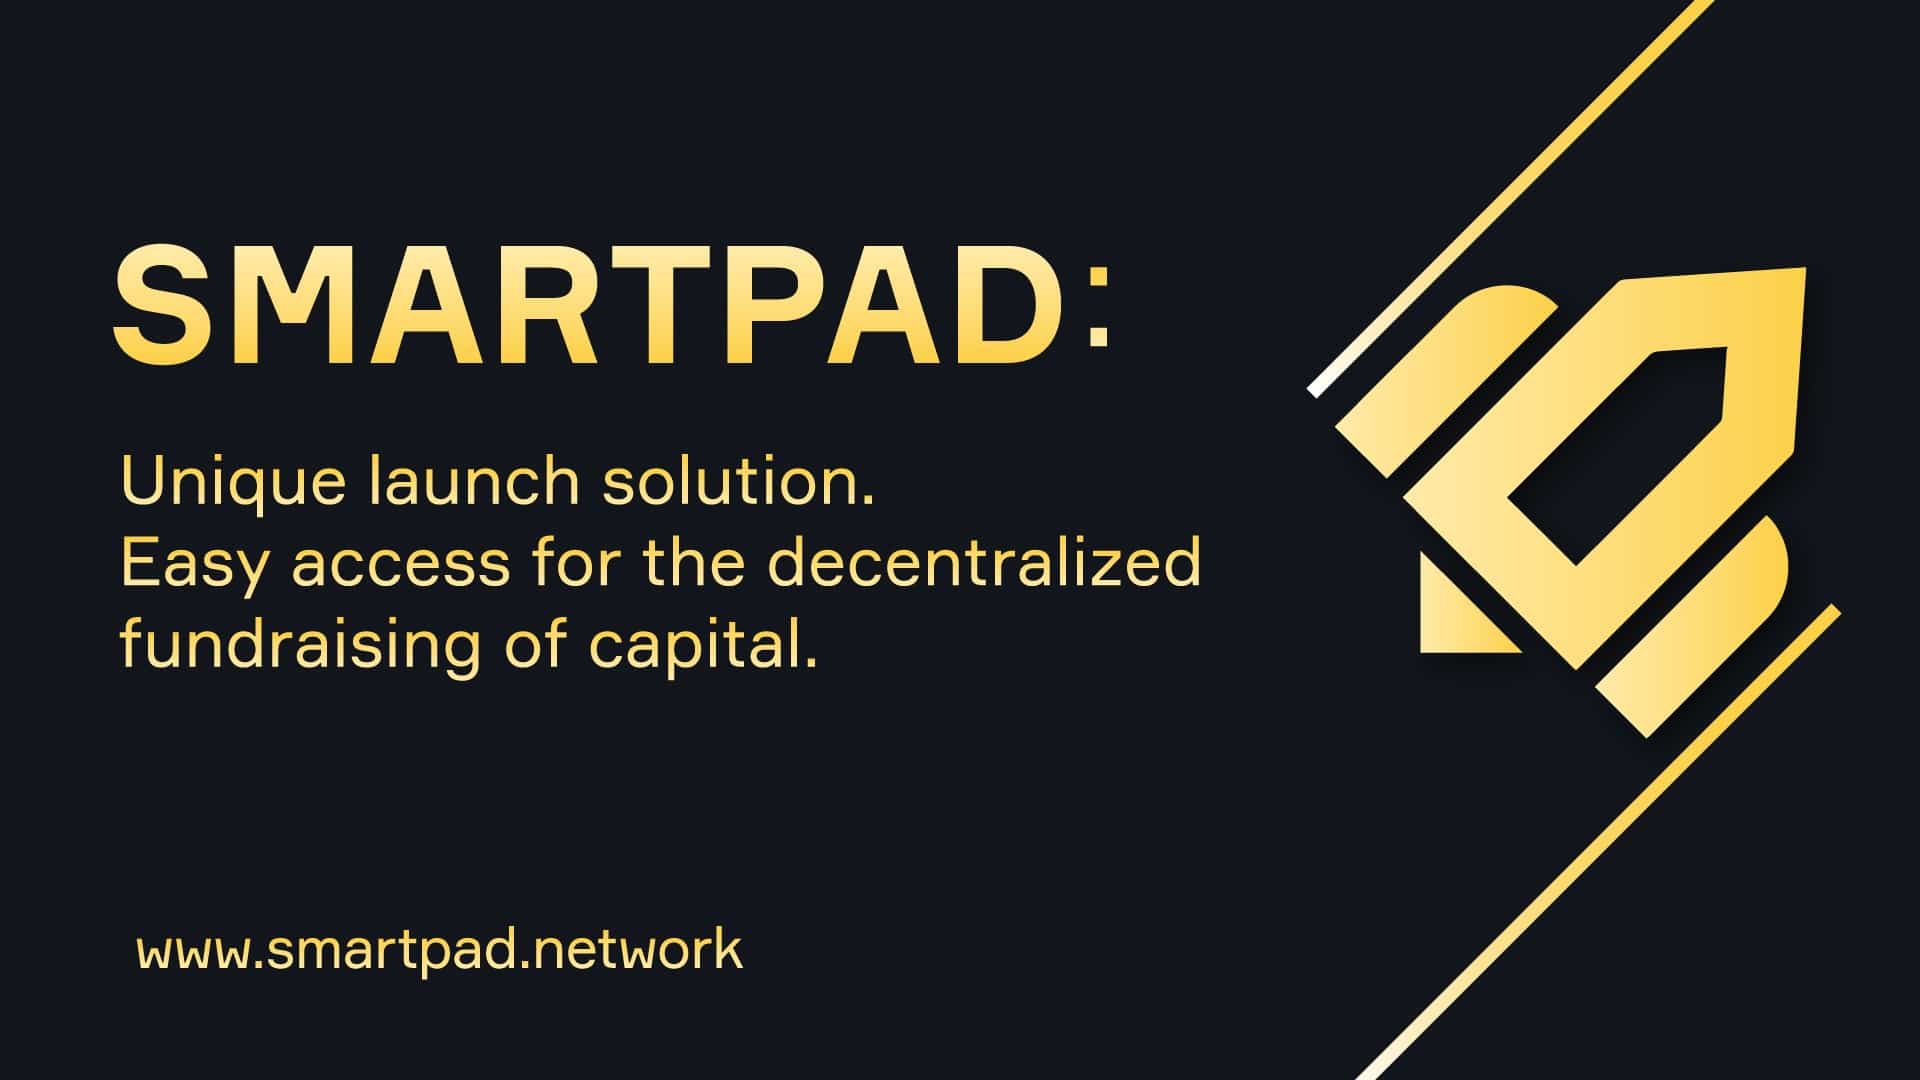 SmartPad launches сross-chain B2B ecosystem for the decentralized fundraising of capital